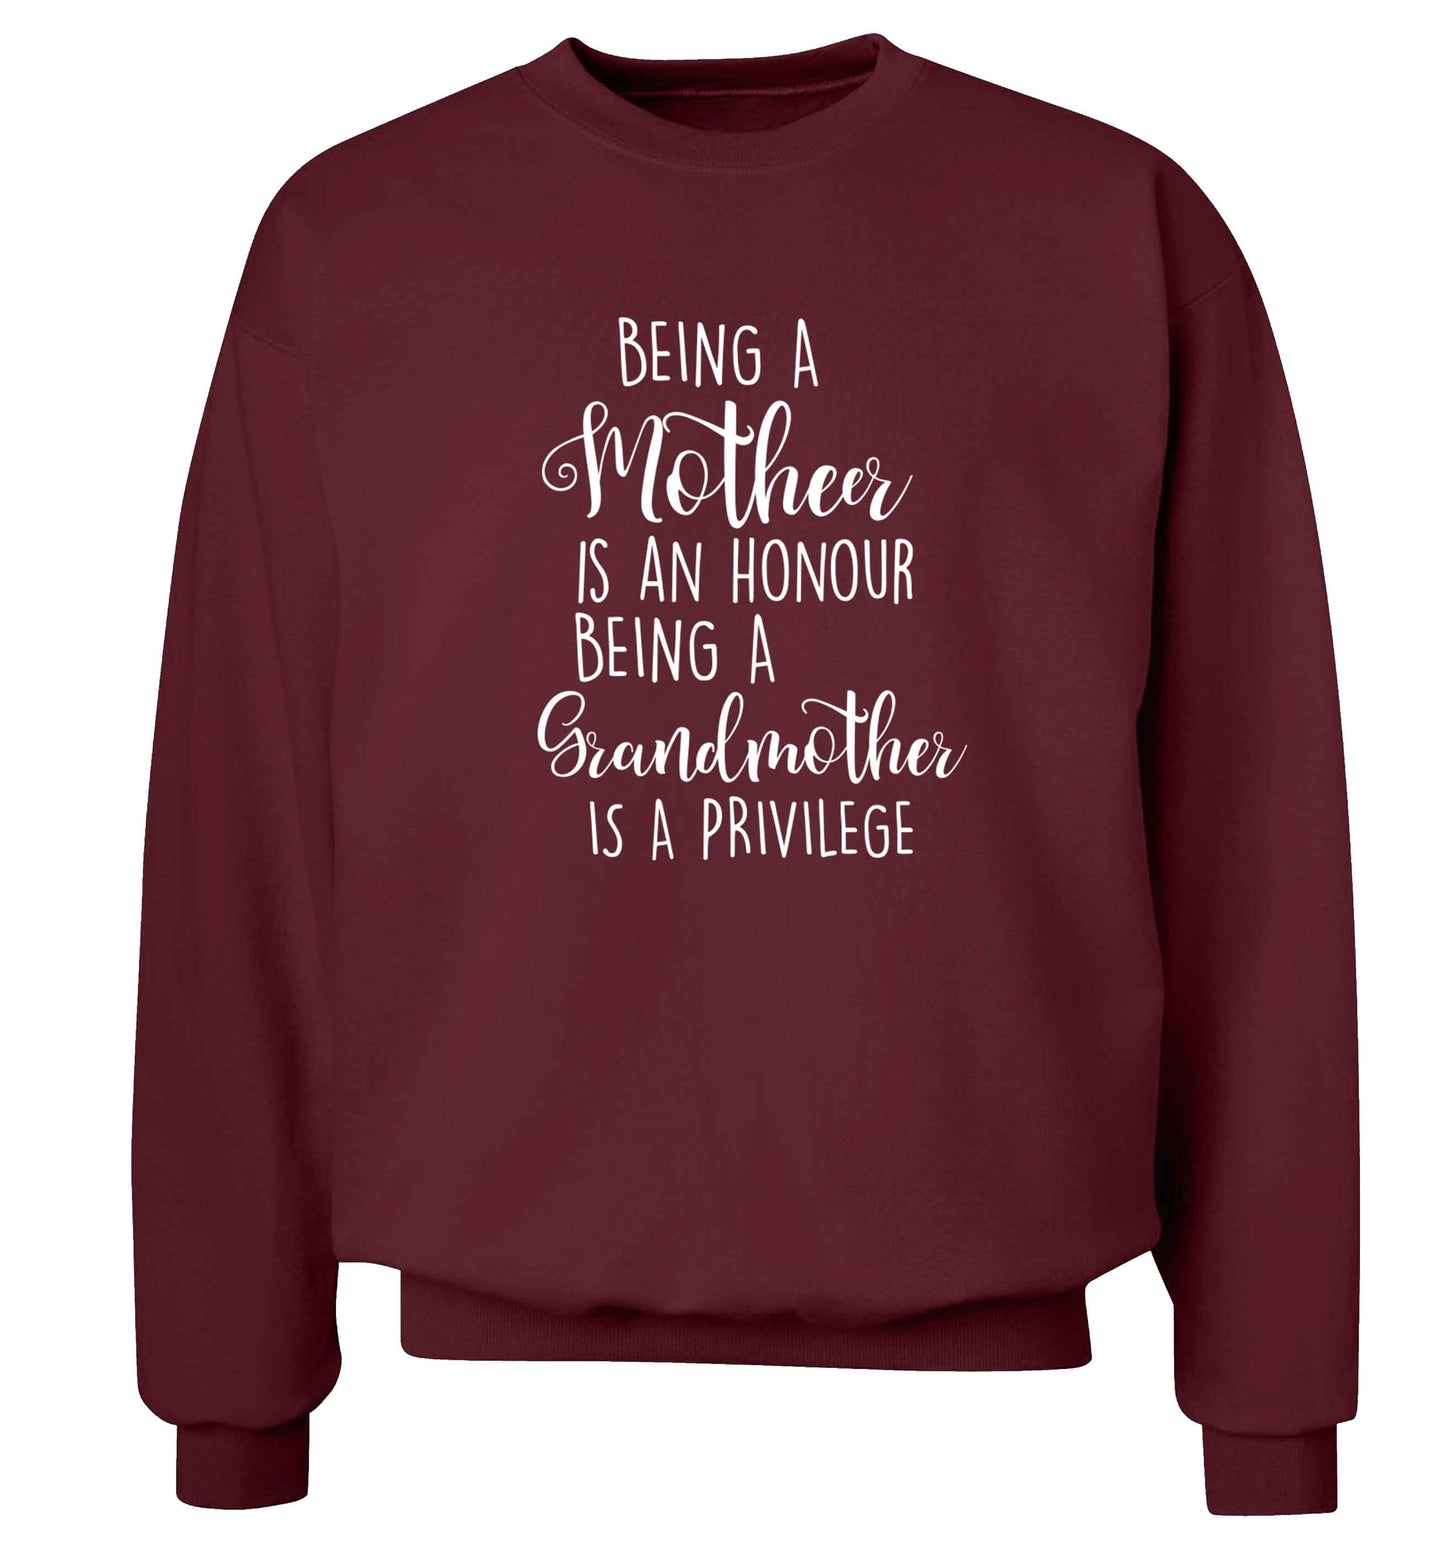 Being a mother is an honour being an grandmother is a privilege Adult's unisex maroon Sweater 2XL